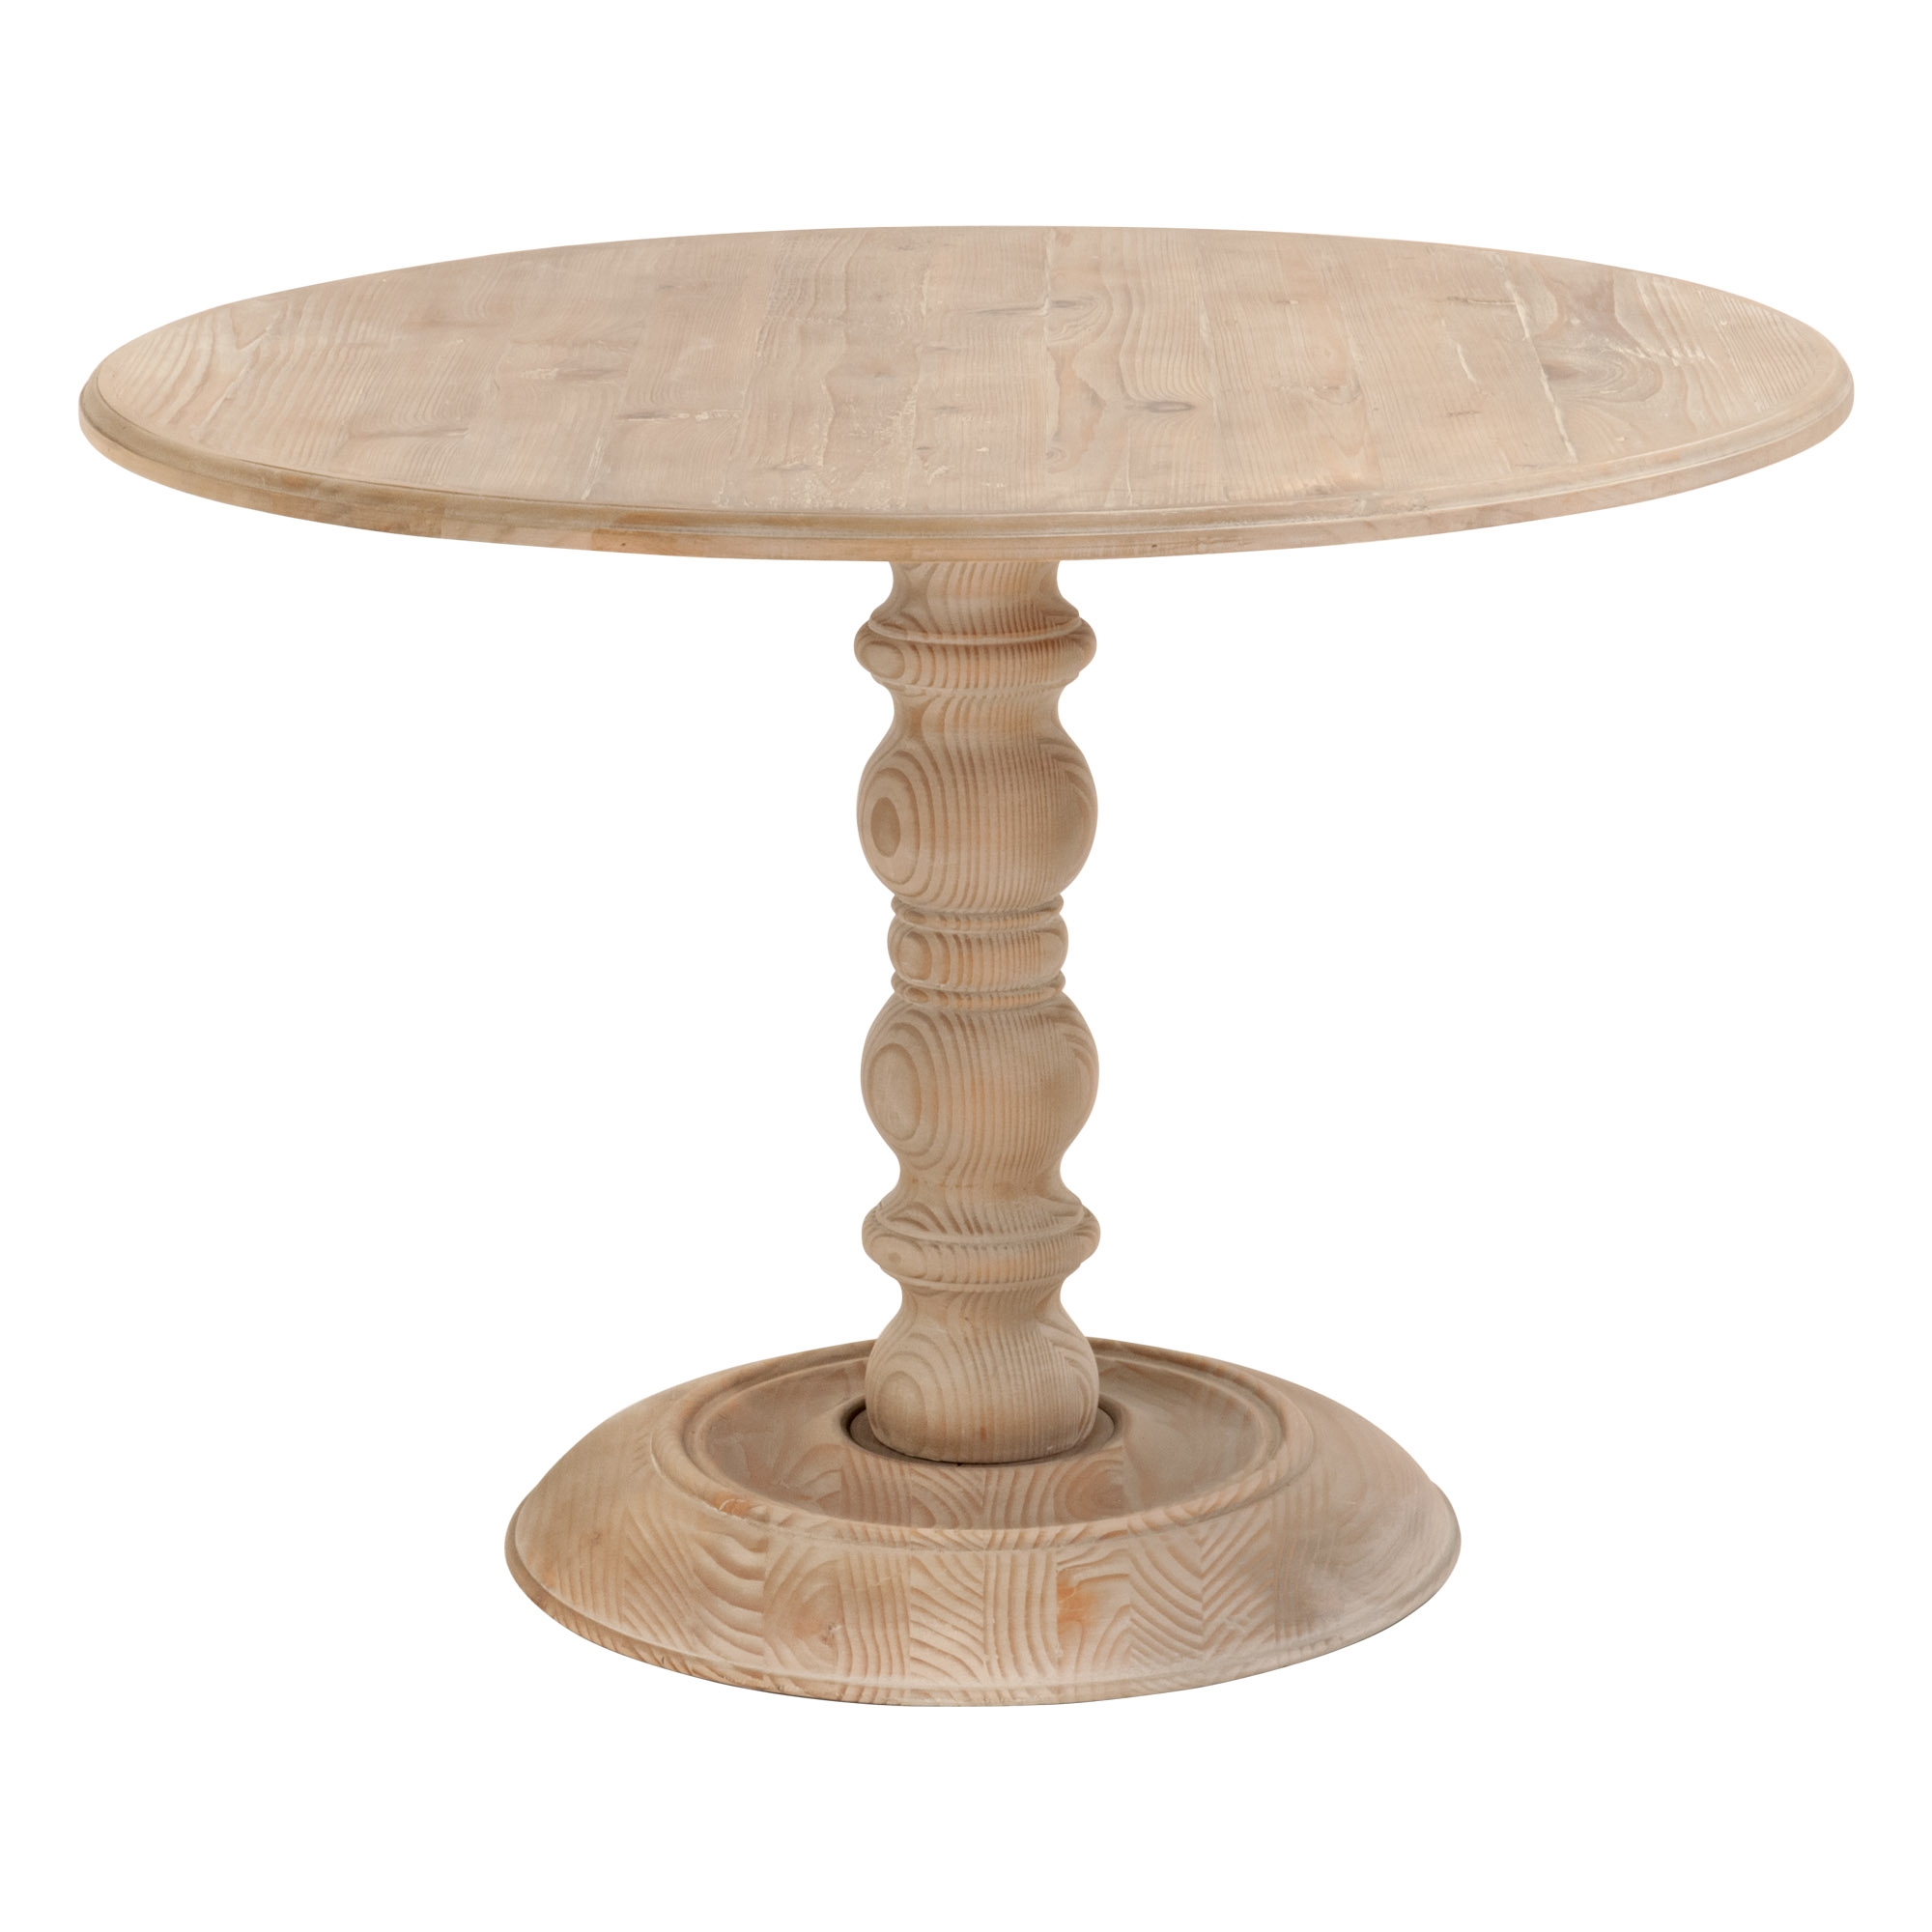 Chelsea 42" Round Dining Table - Image 1